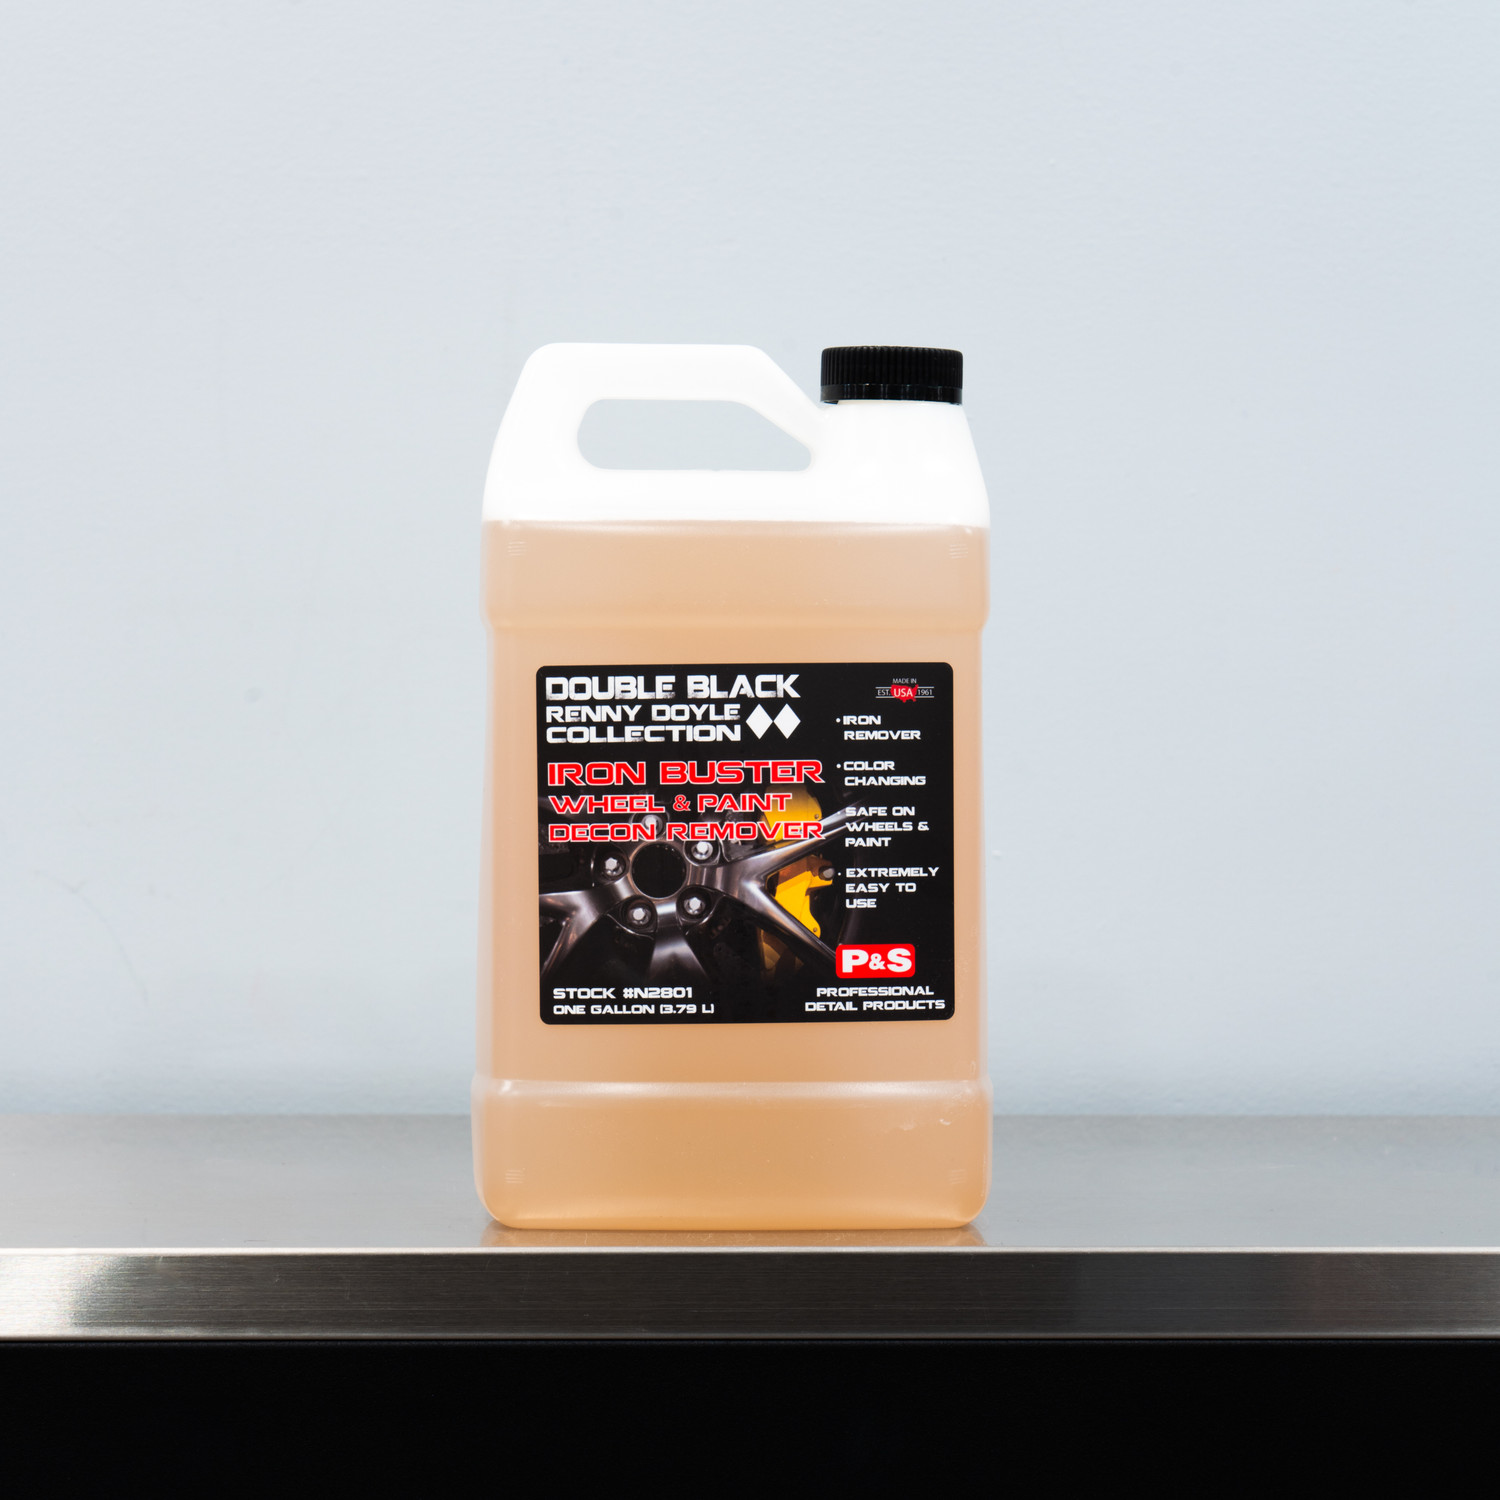 P&S Iron Buster - The Best Detailing Chemical Decontamination Chemical 